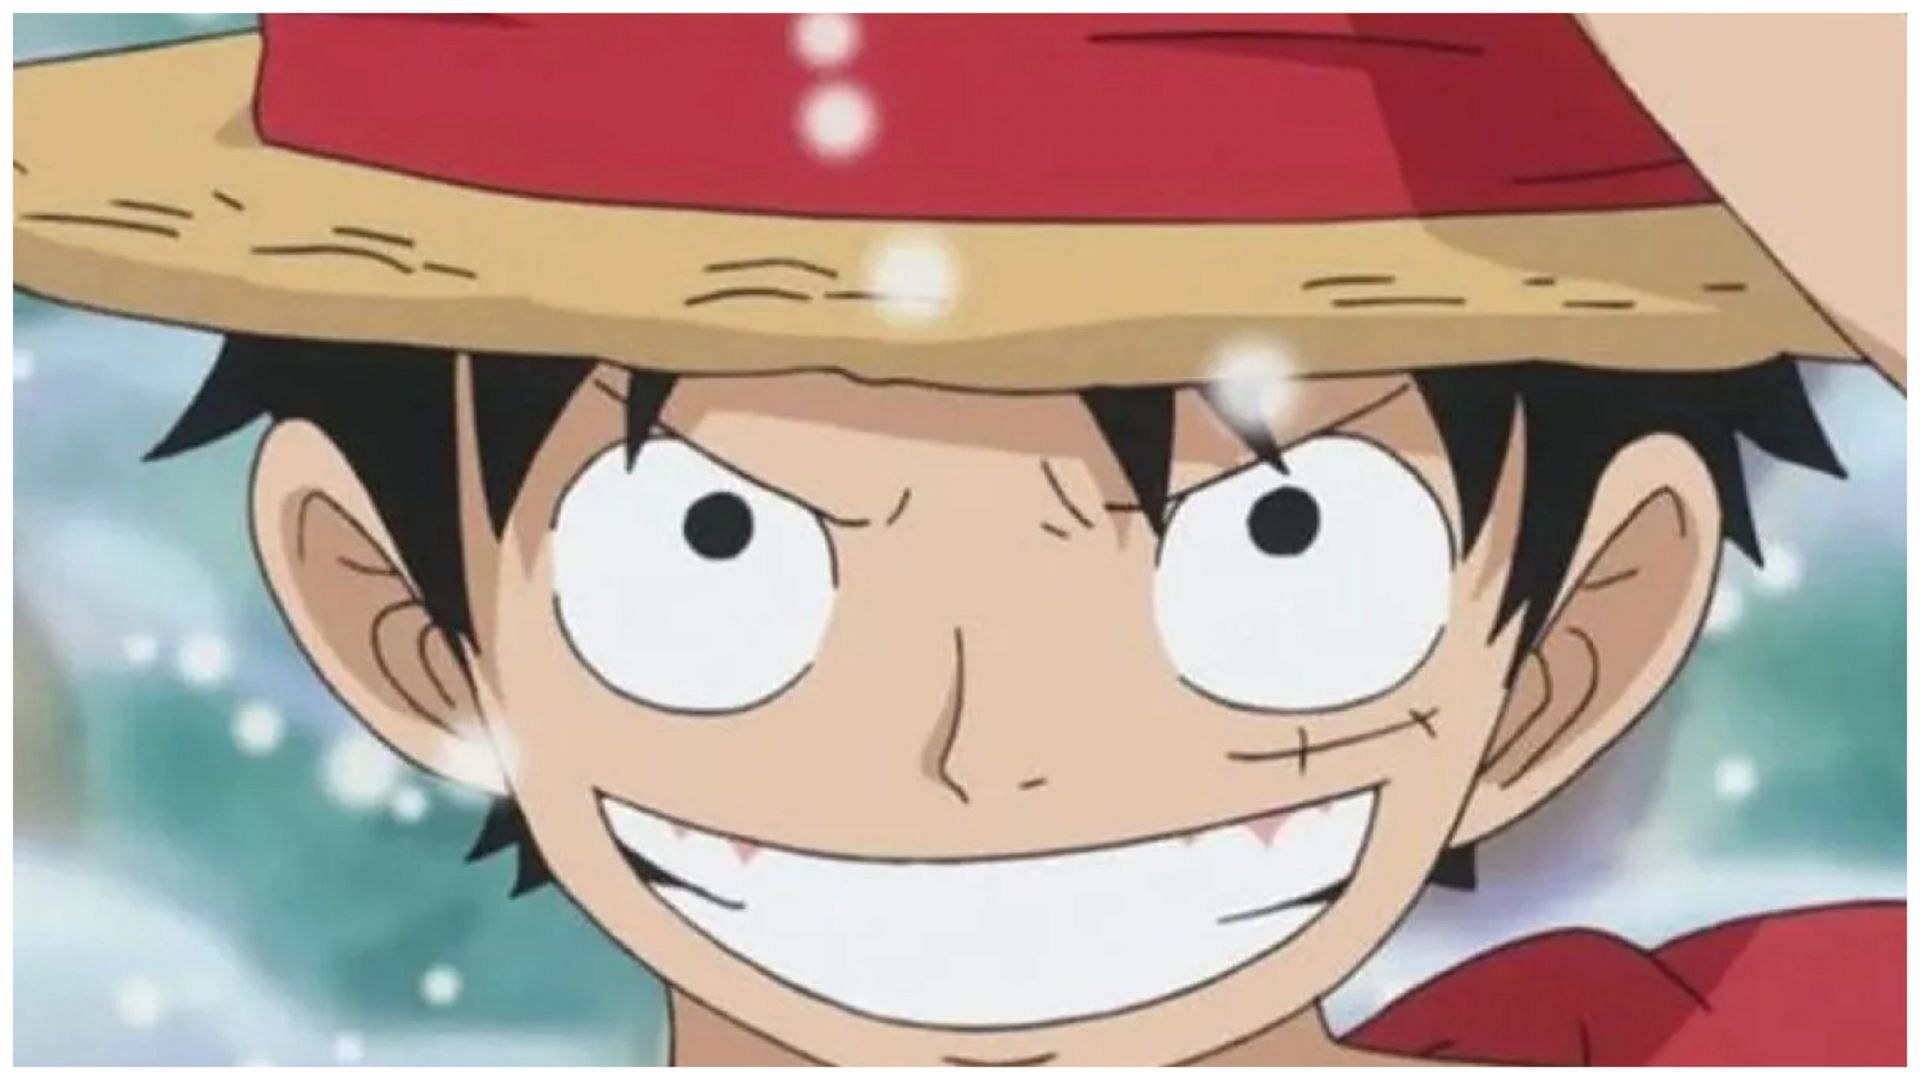 Monkey D. Luffy is the main protagonist of One Piece anime (Image via Toei Animations)